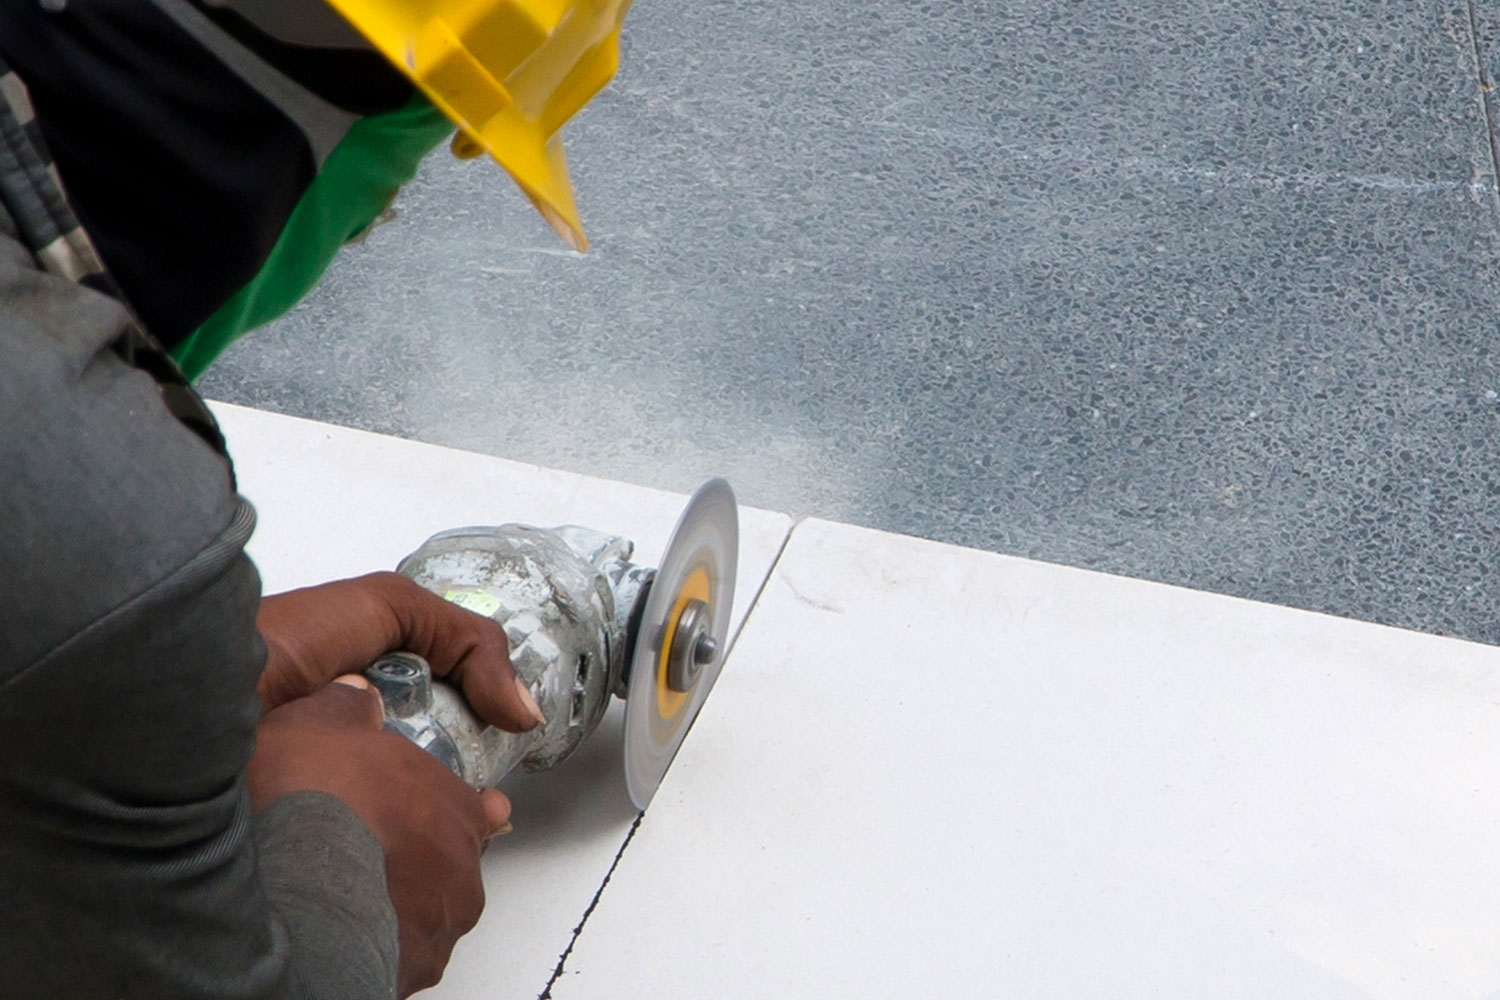 Construction worker using a sanding disk in cutting the cement board